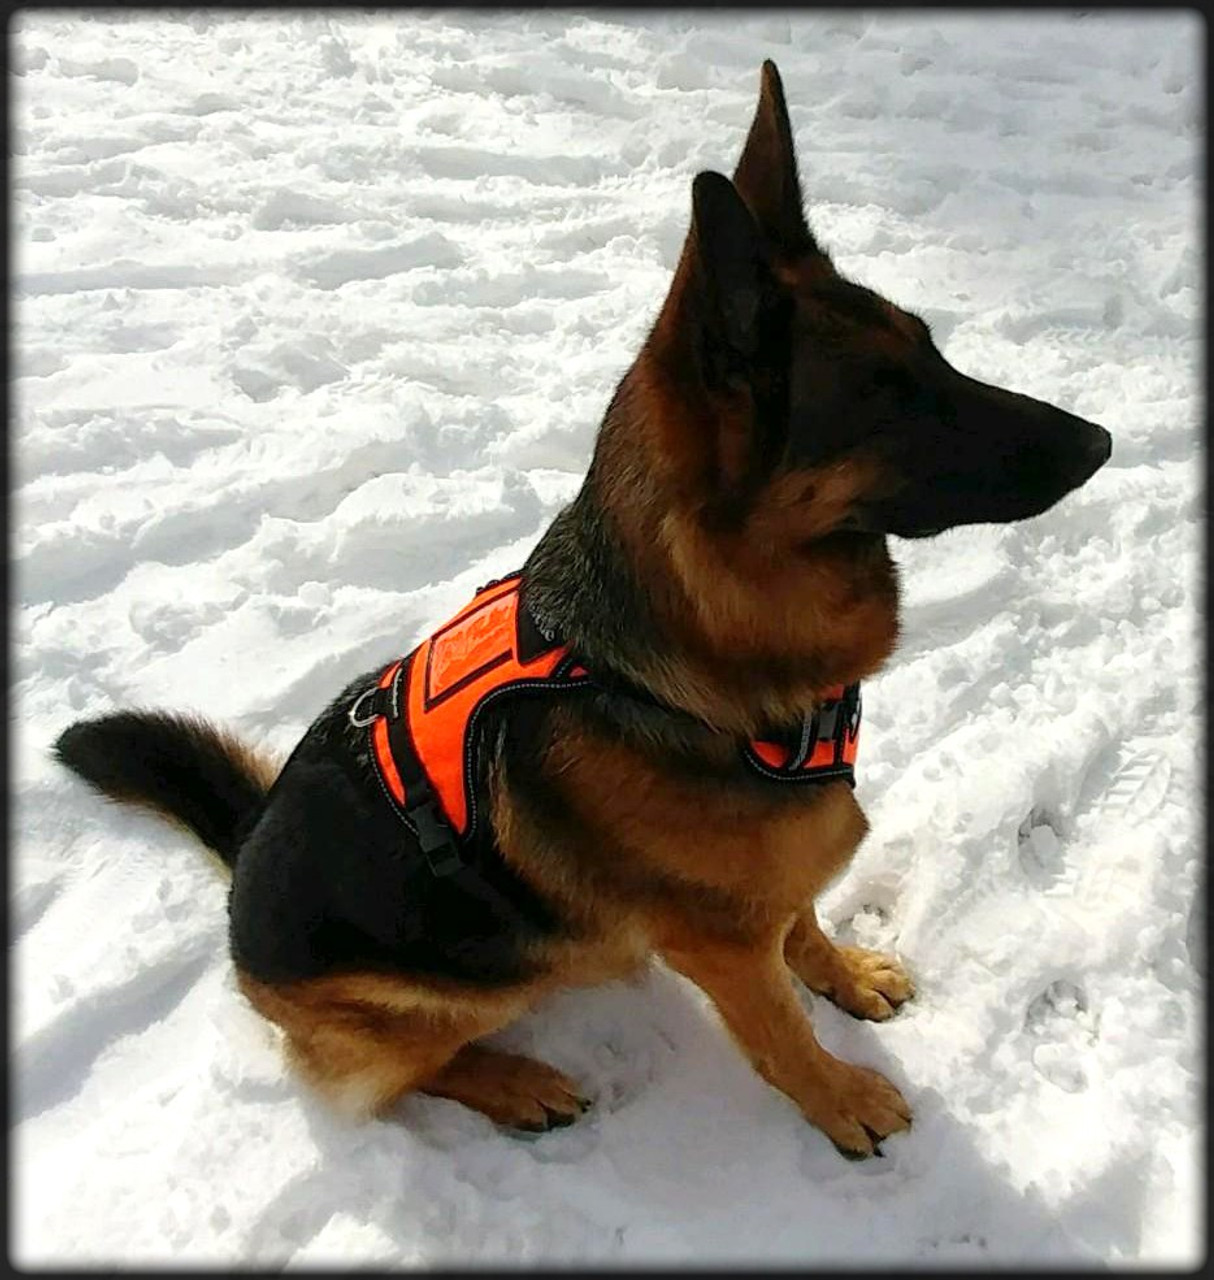 Search & Rescue Reflective Padded Tracking Harness